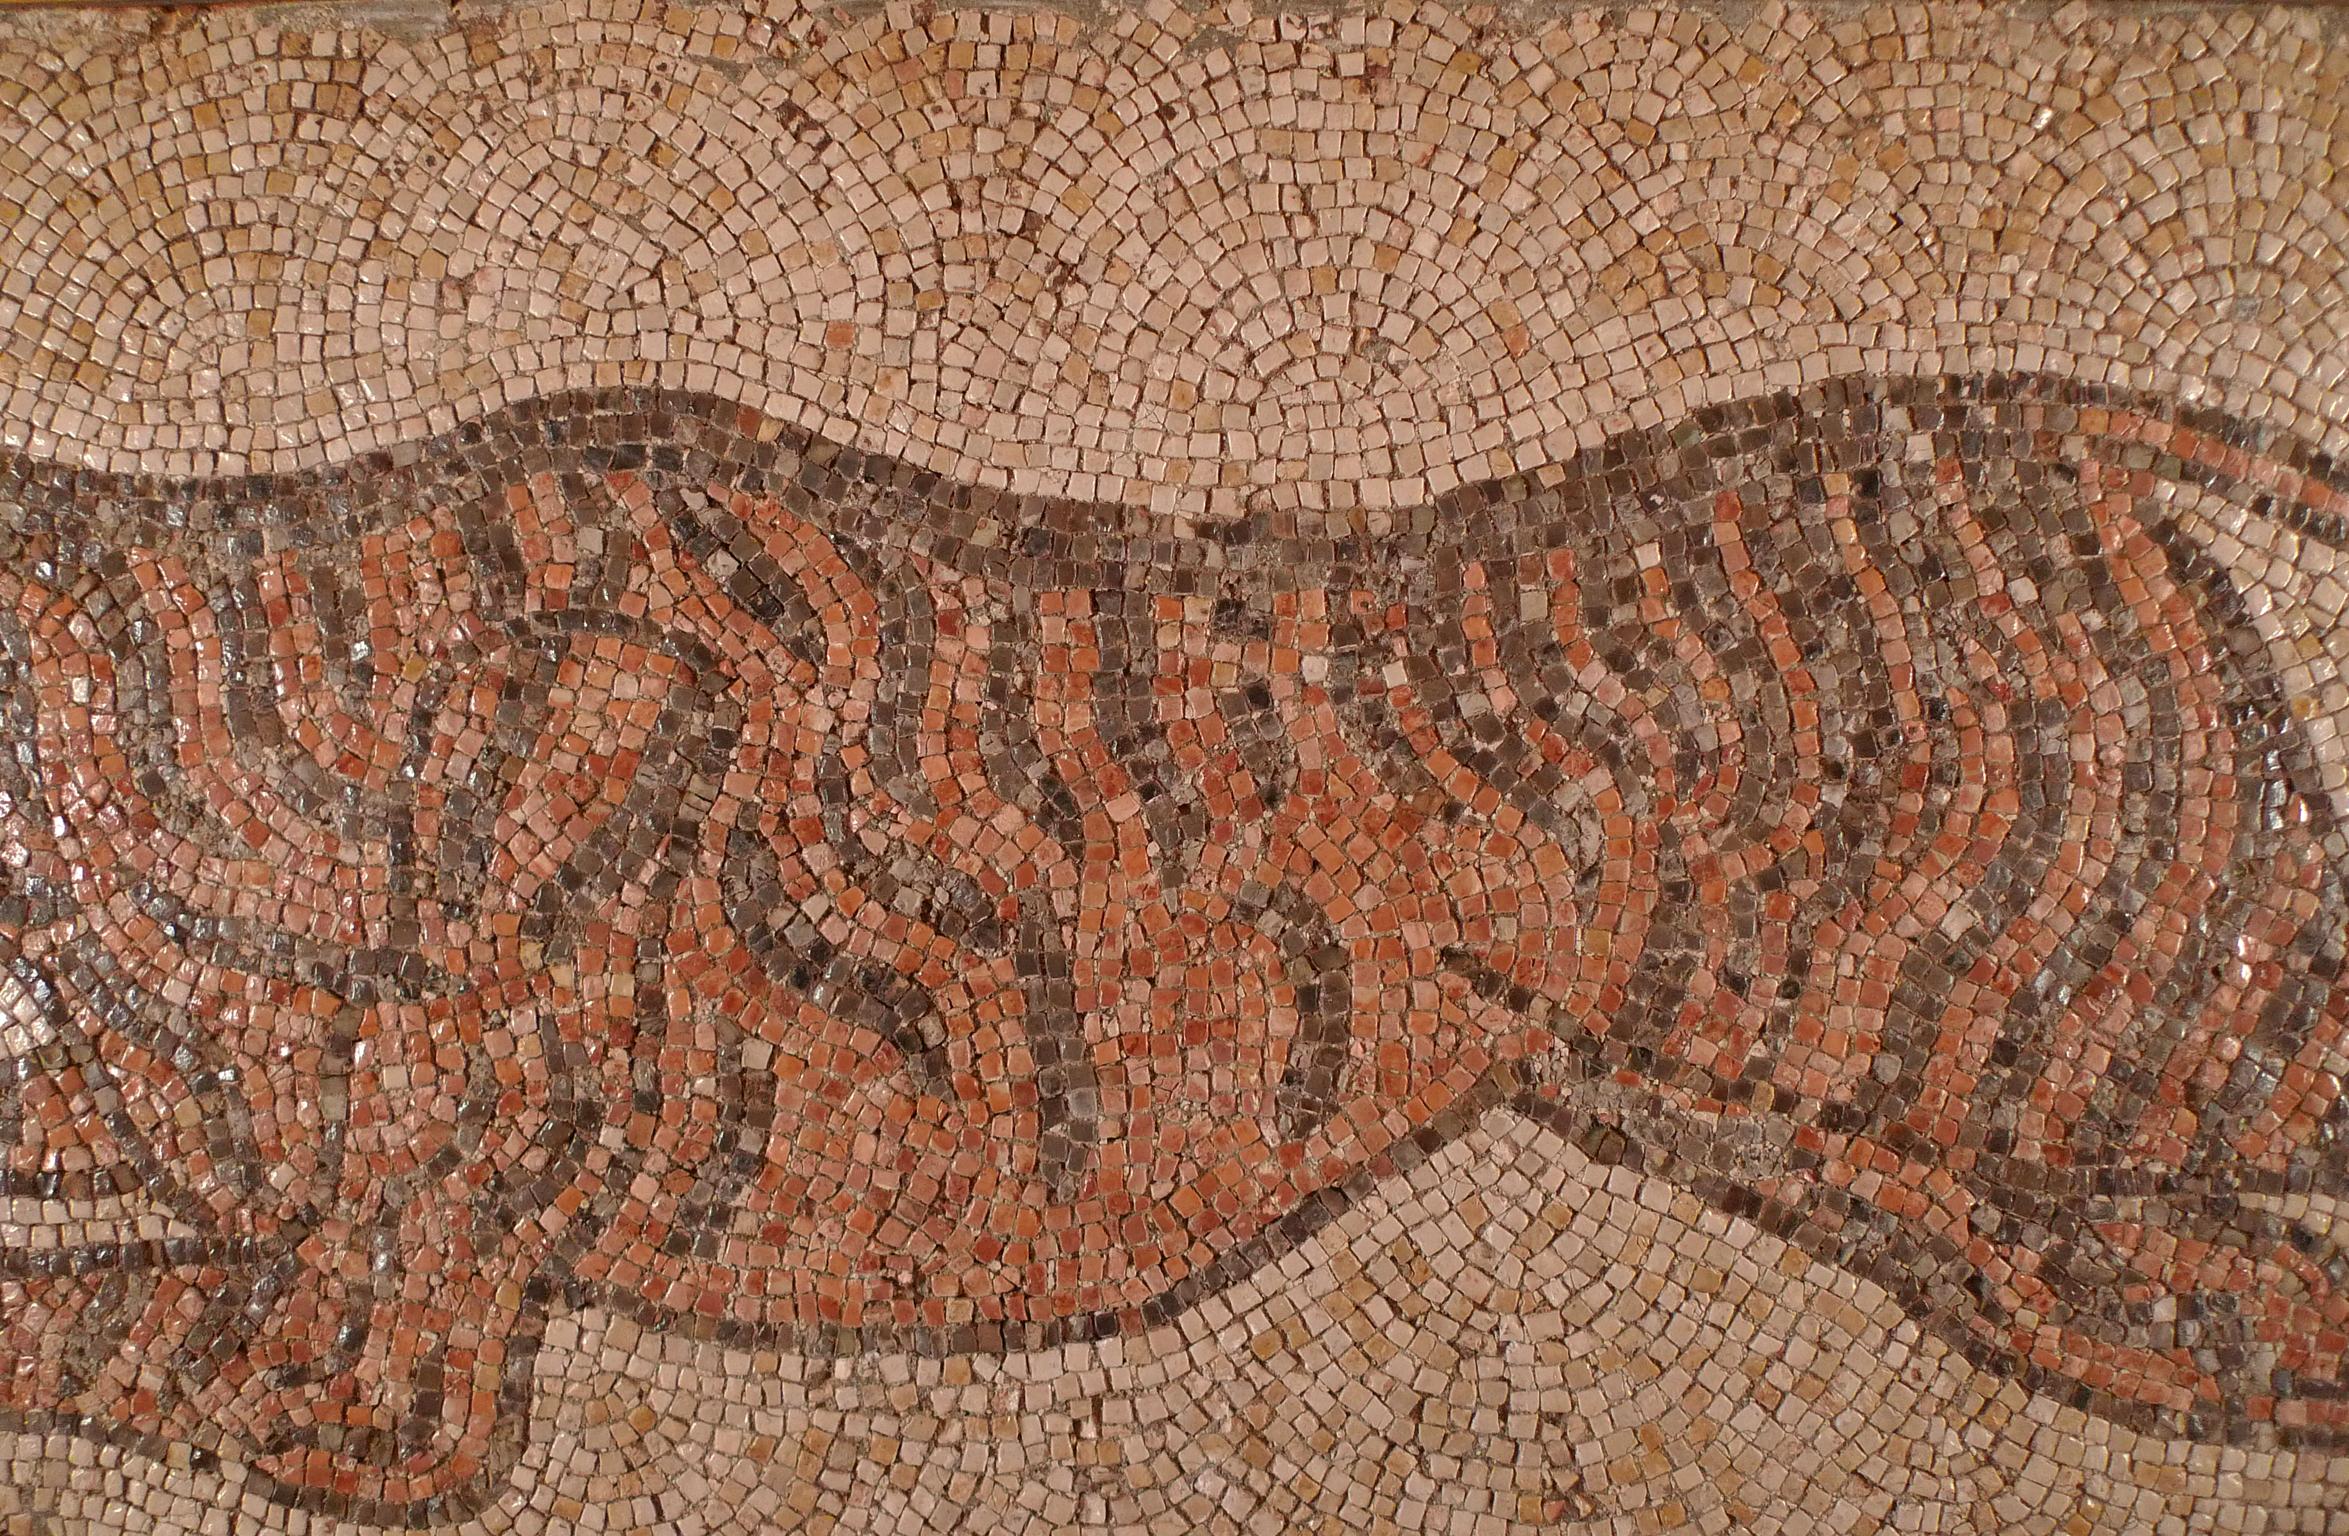 ROMAN MOSAIC
Roman 4th Century AD
Roman Provinces of North Africa
A TIGER HUNTING ITS PREY
40-1/4 x 84-1/4 inches (102 x 213 x 2.5 cm.)
Within an iron metal frame

PROVENANCE
Nagel Auktionen, Germany - sale date: 17th October 1992
Spanish Collector,